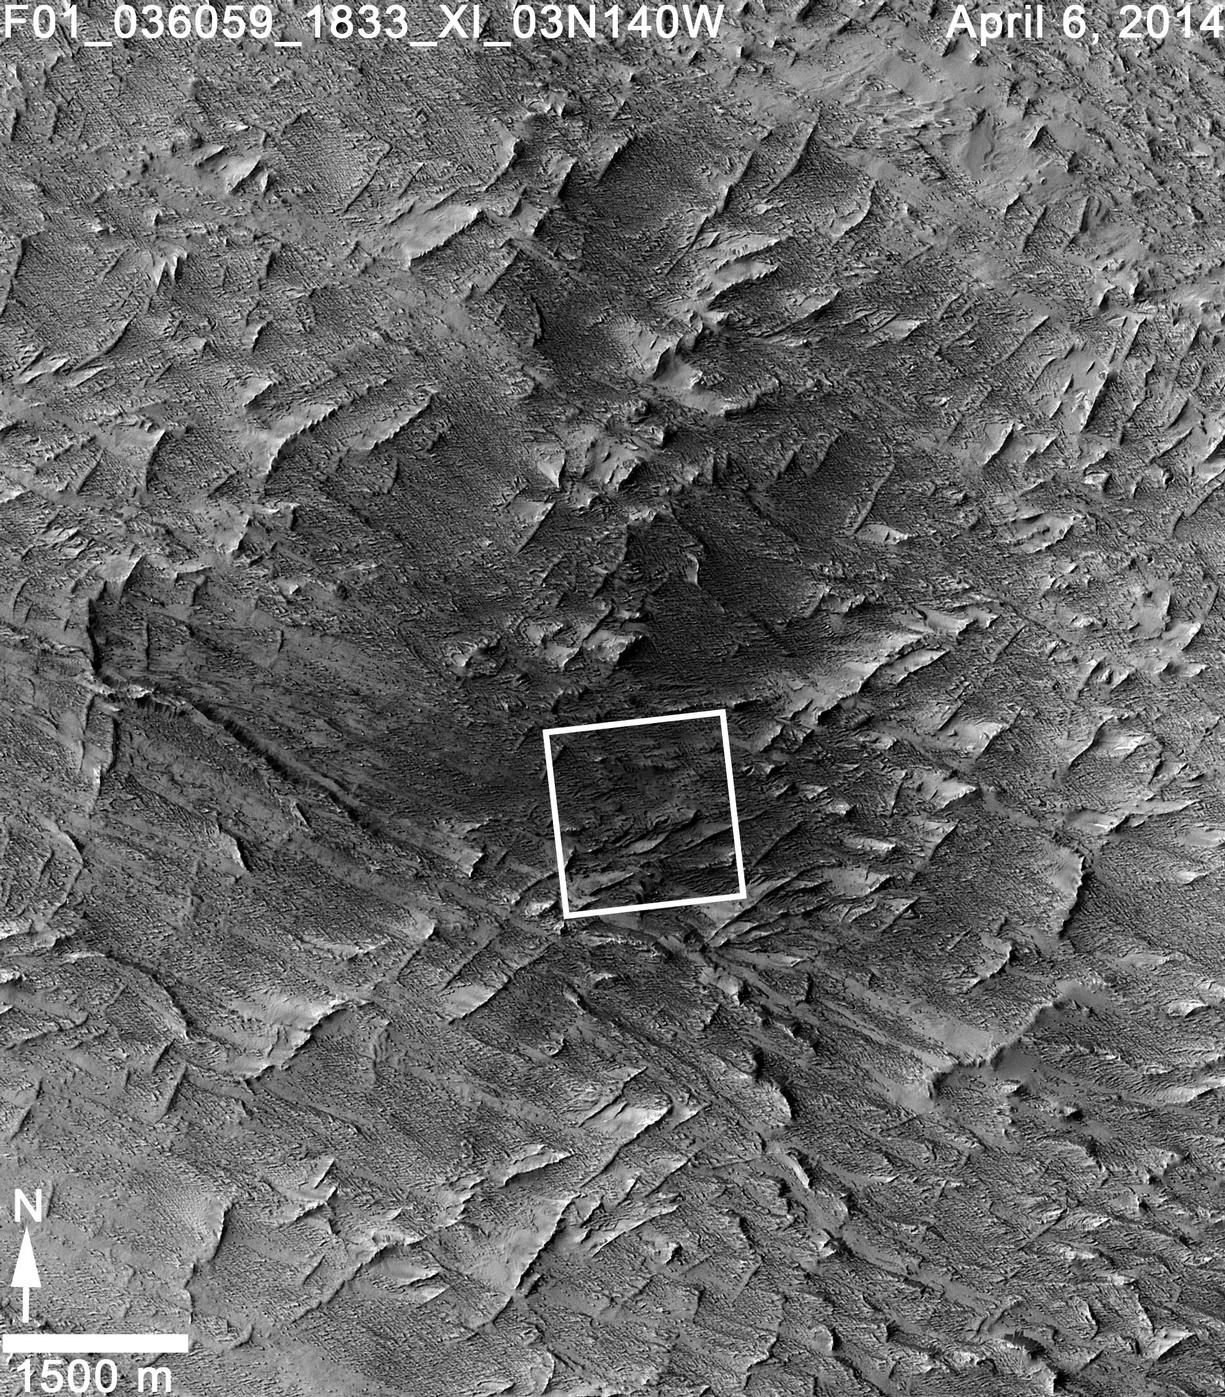 Fresh Mars Crater Confirmed Within Impact Scar